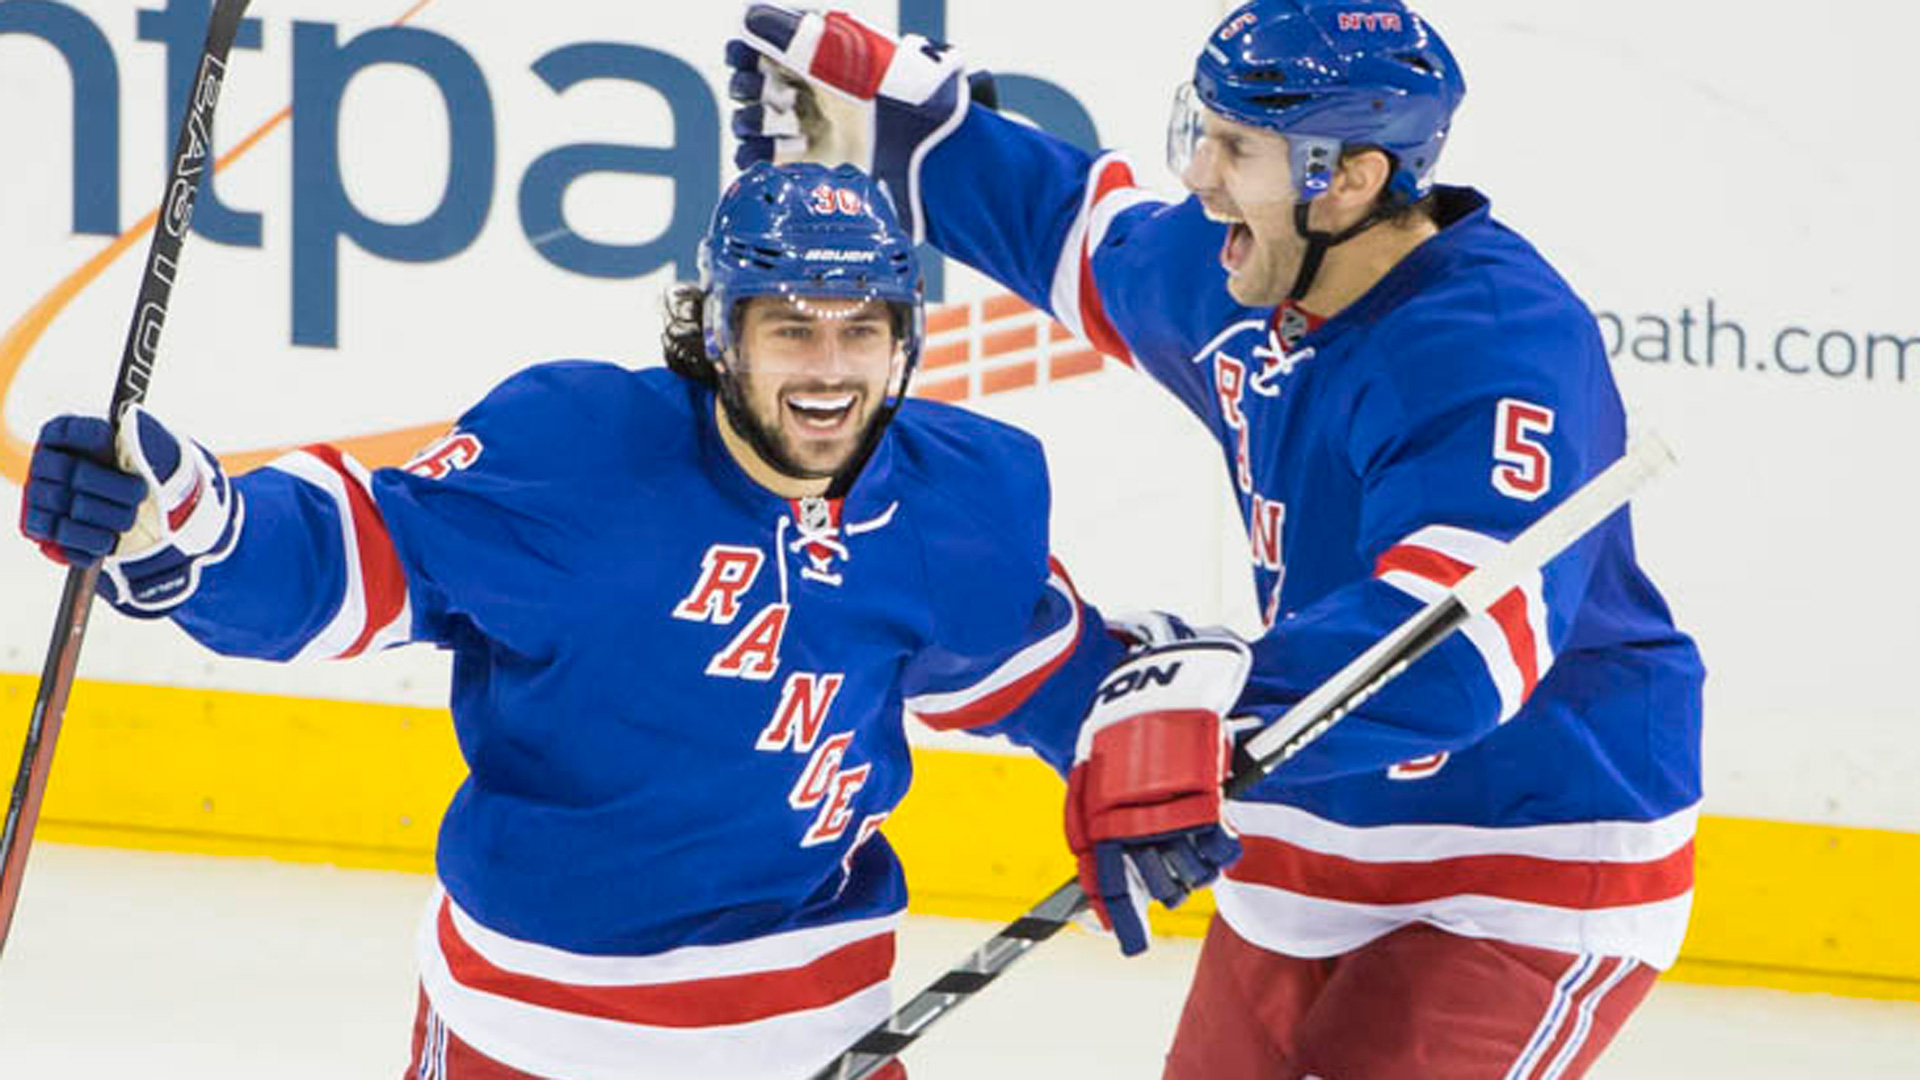 Zuccarello One of the Best Power Play 